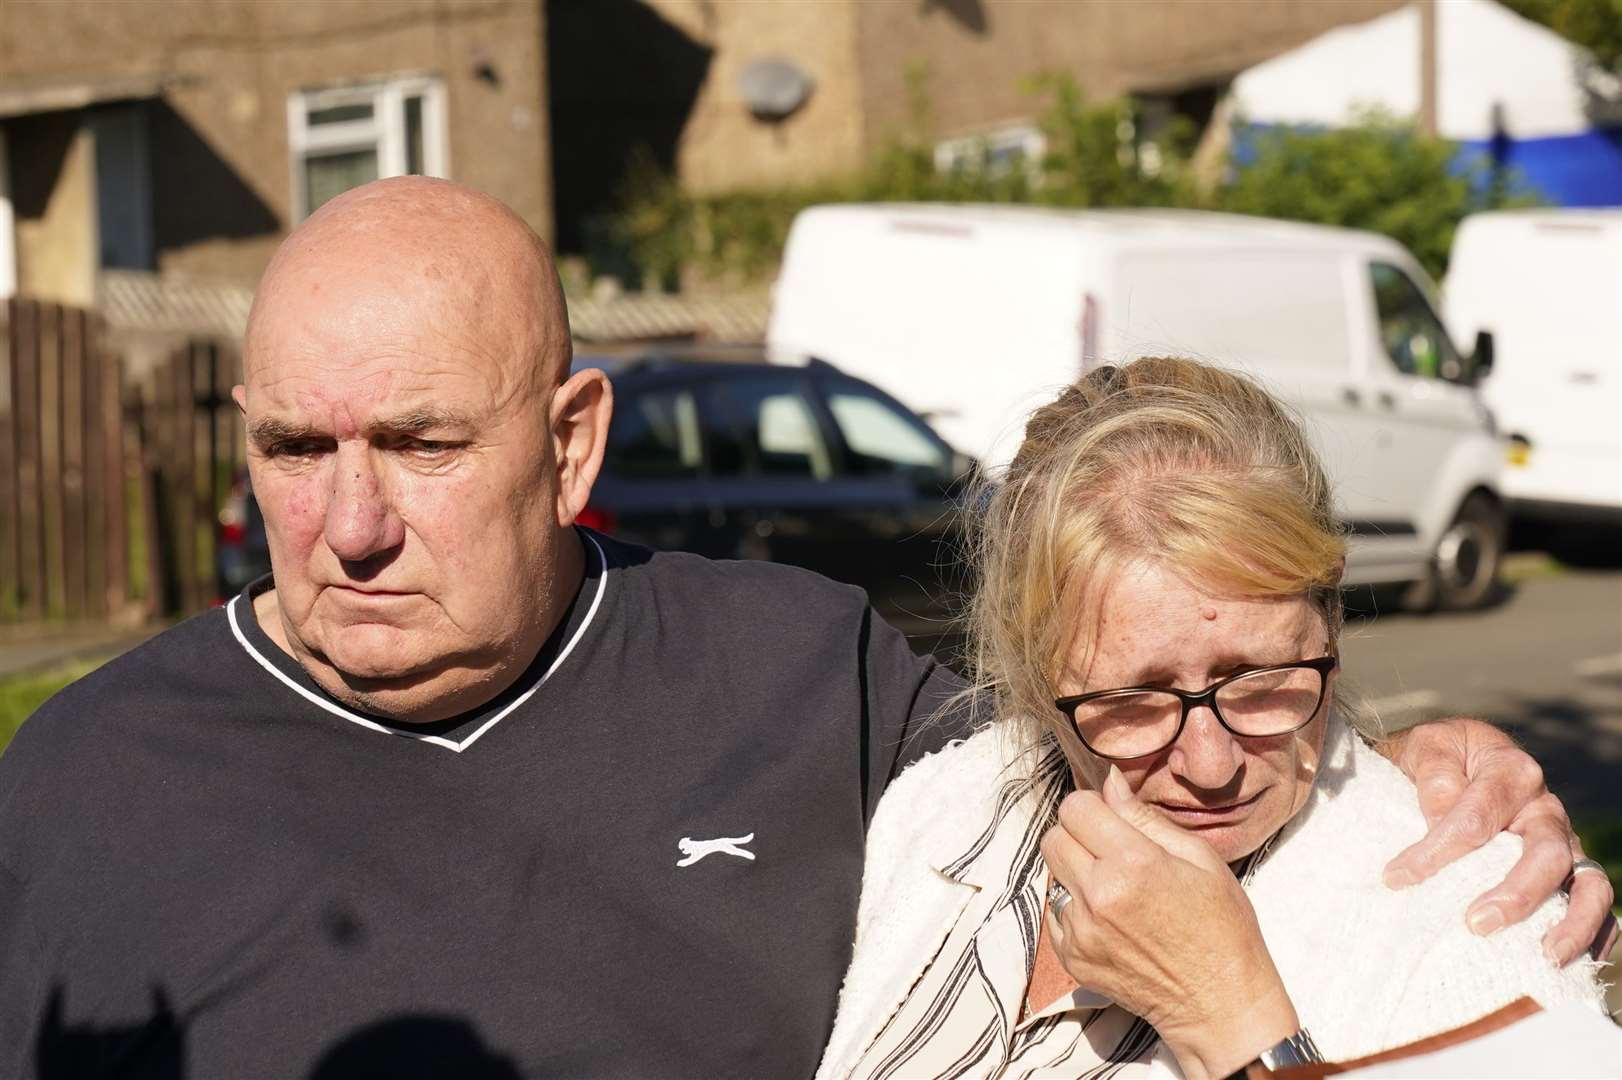 Debbie and Trevor Bennett, the grandparents of two of the victims, speaking to the media at the scene (Danny Lawson/PA)